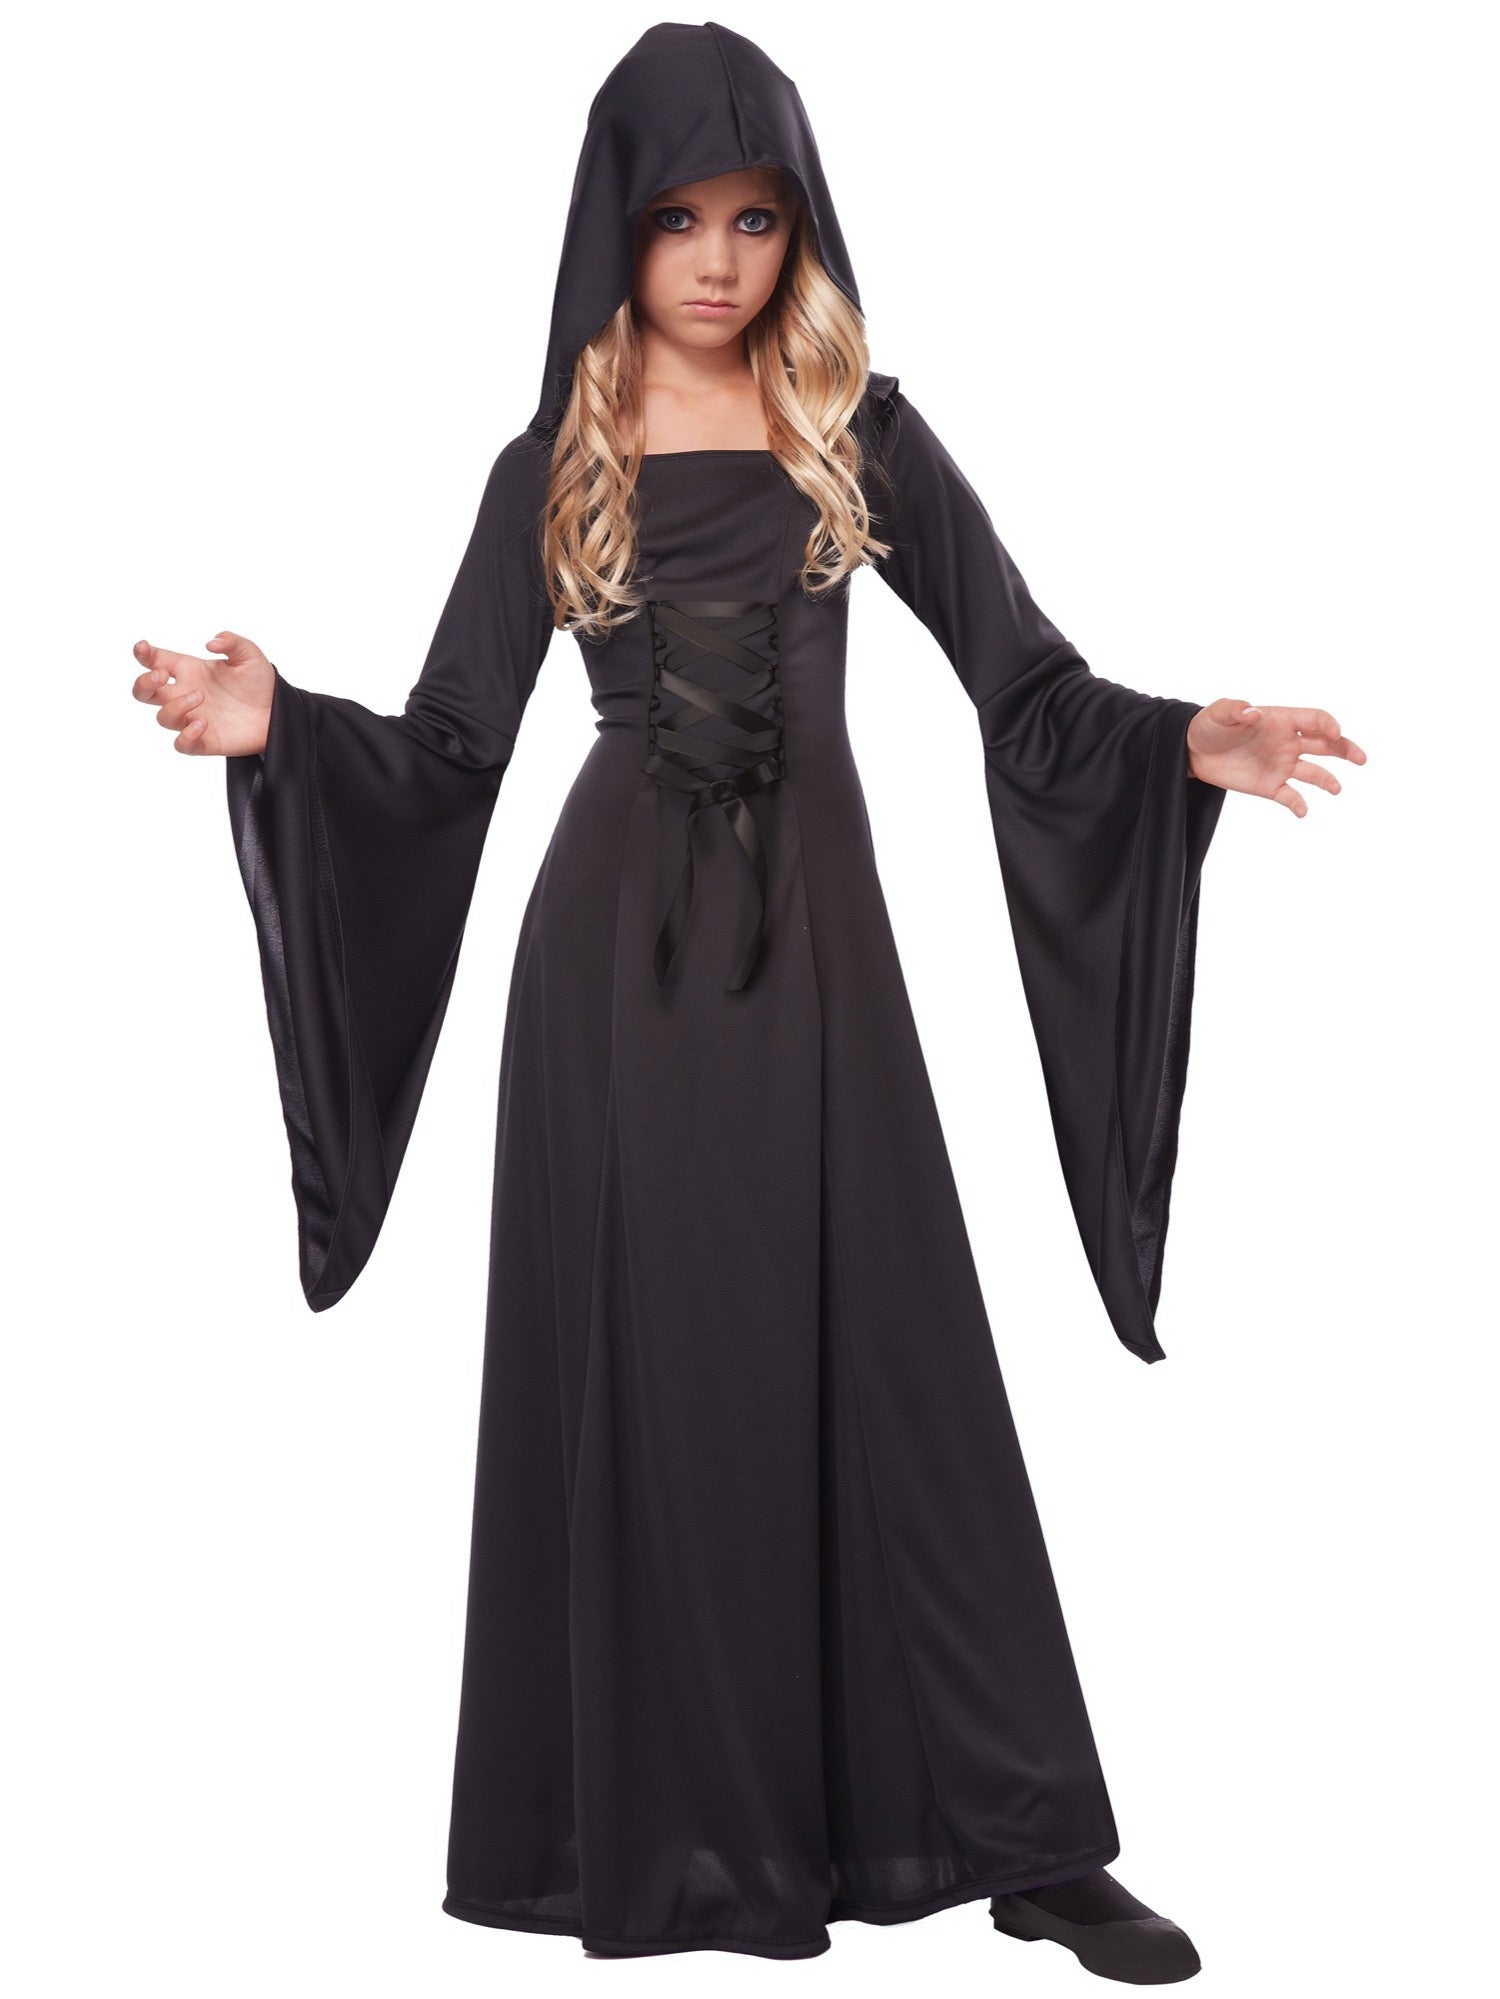 Hobbypos Black Hooded Robe Witch Sorceress Vampire Gothic Medieval Ghost Girls Costume